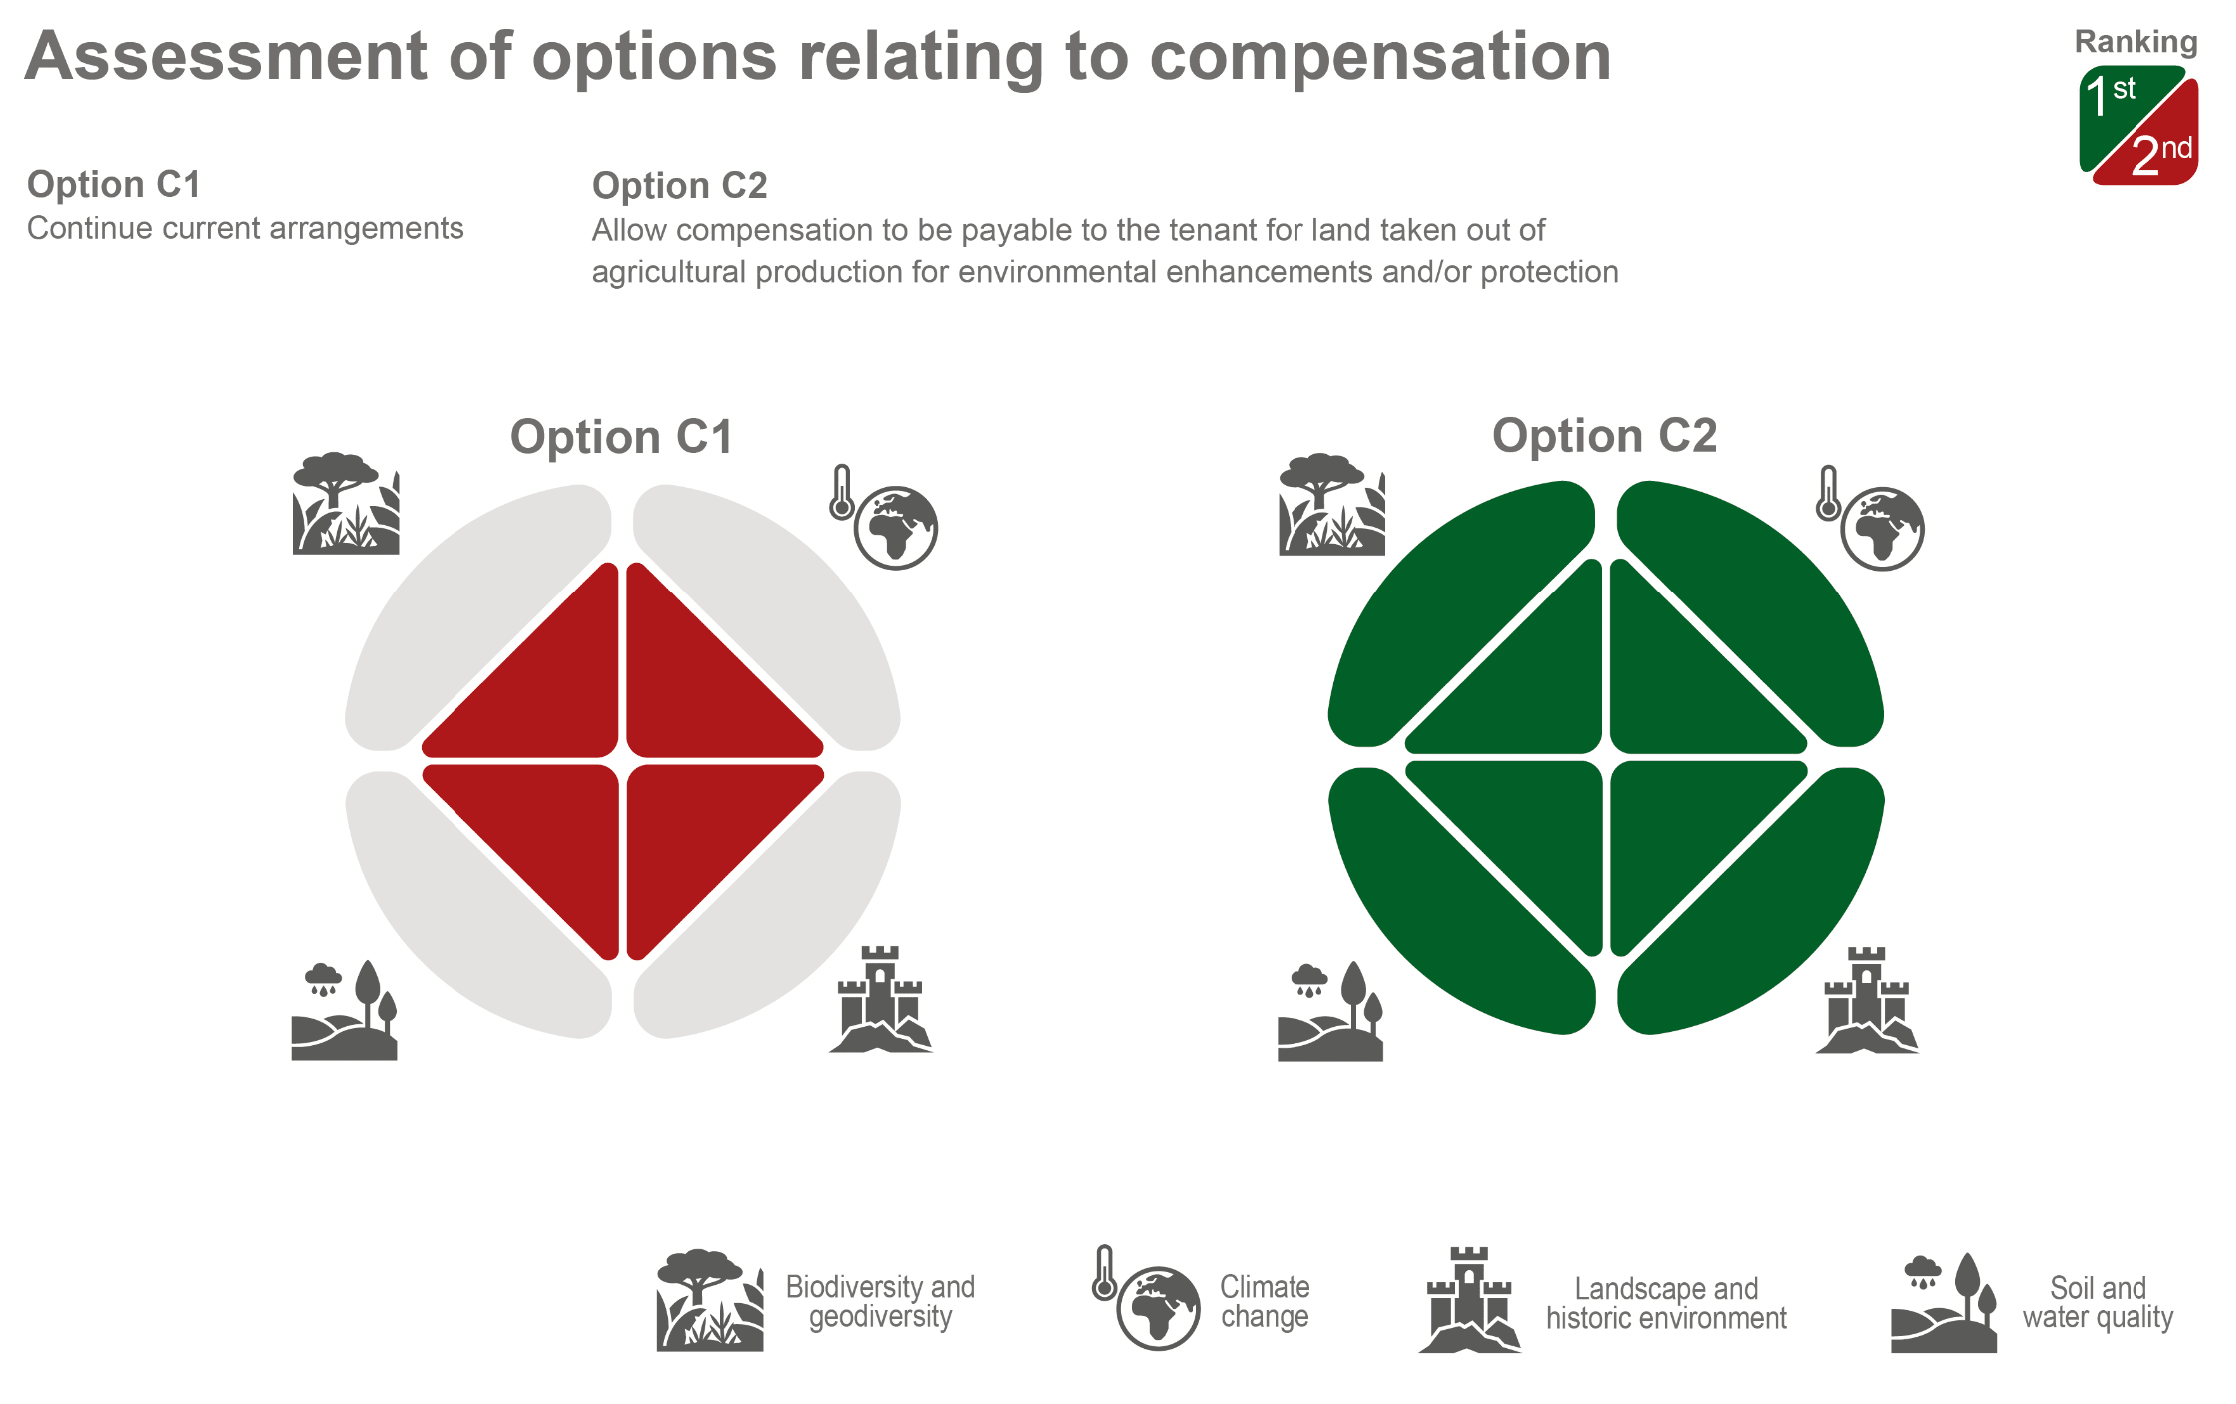 Infographic showing the assessment results of the two options relating to compensation.  Option C2 performs more favourably than Option C1 across all four SEA topics.